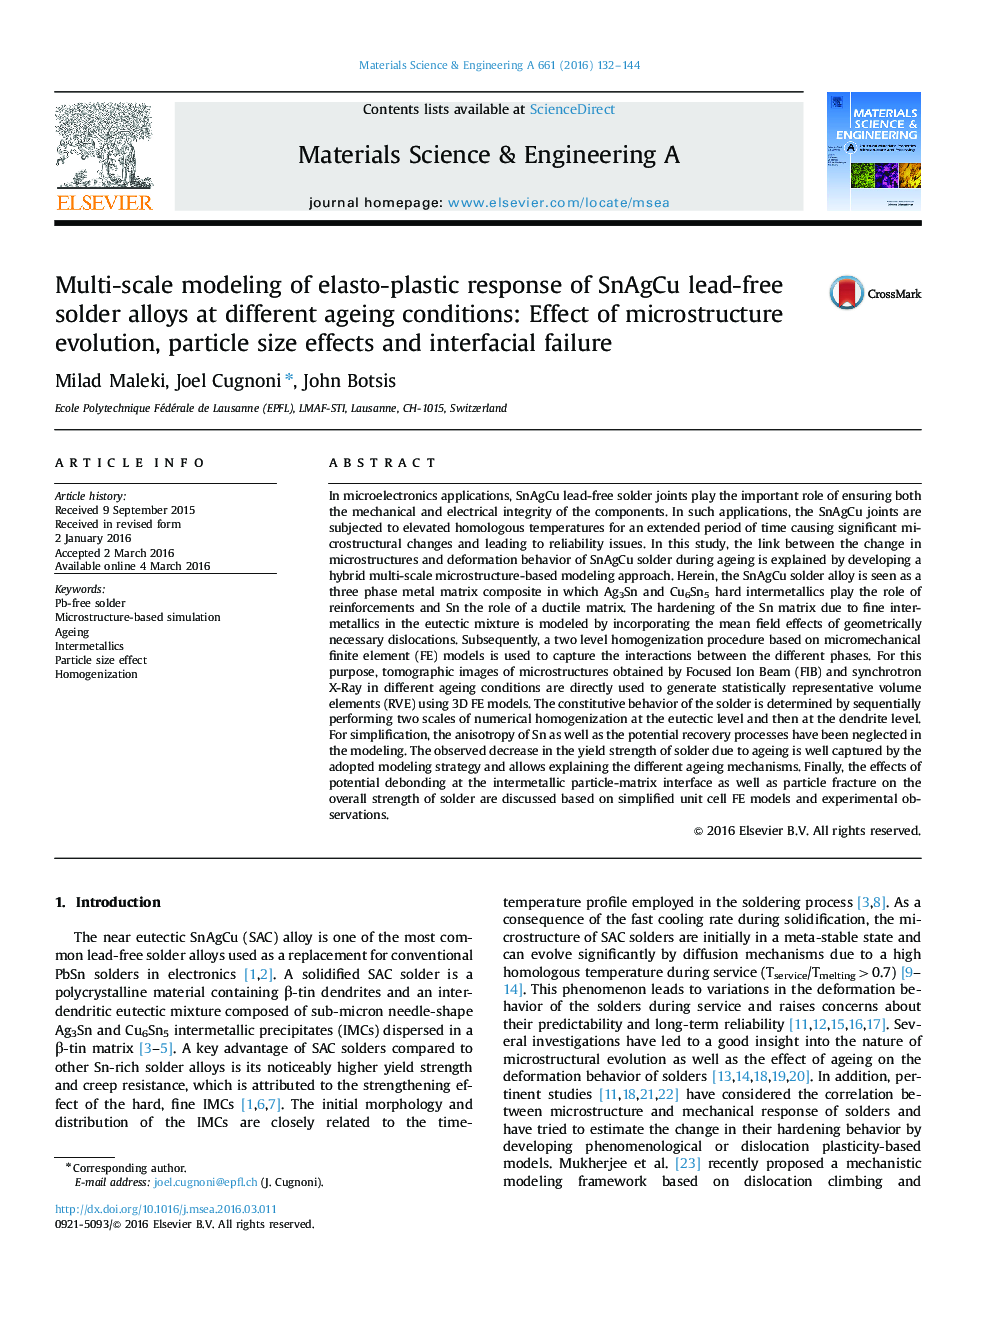 Multi-scale modeling of elasto-plastic response of SnAgCu lead-free solder alloys at different ageing conditions: Effect of microstructure evolution, particle size effects and interfacial failure